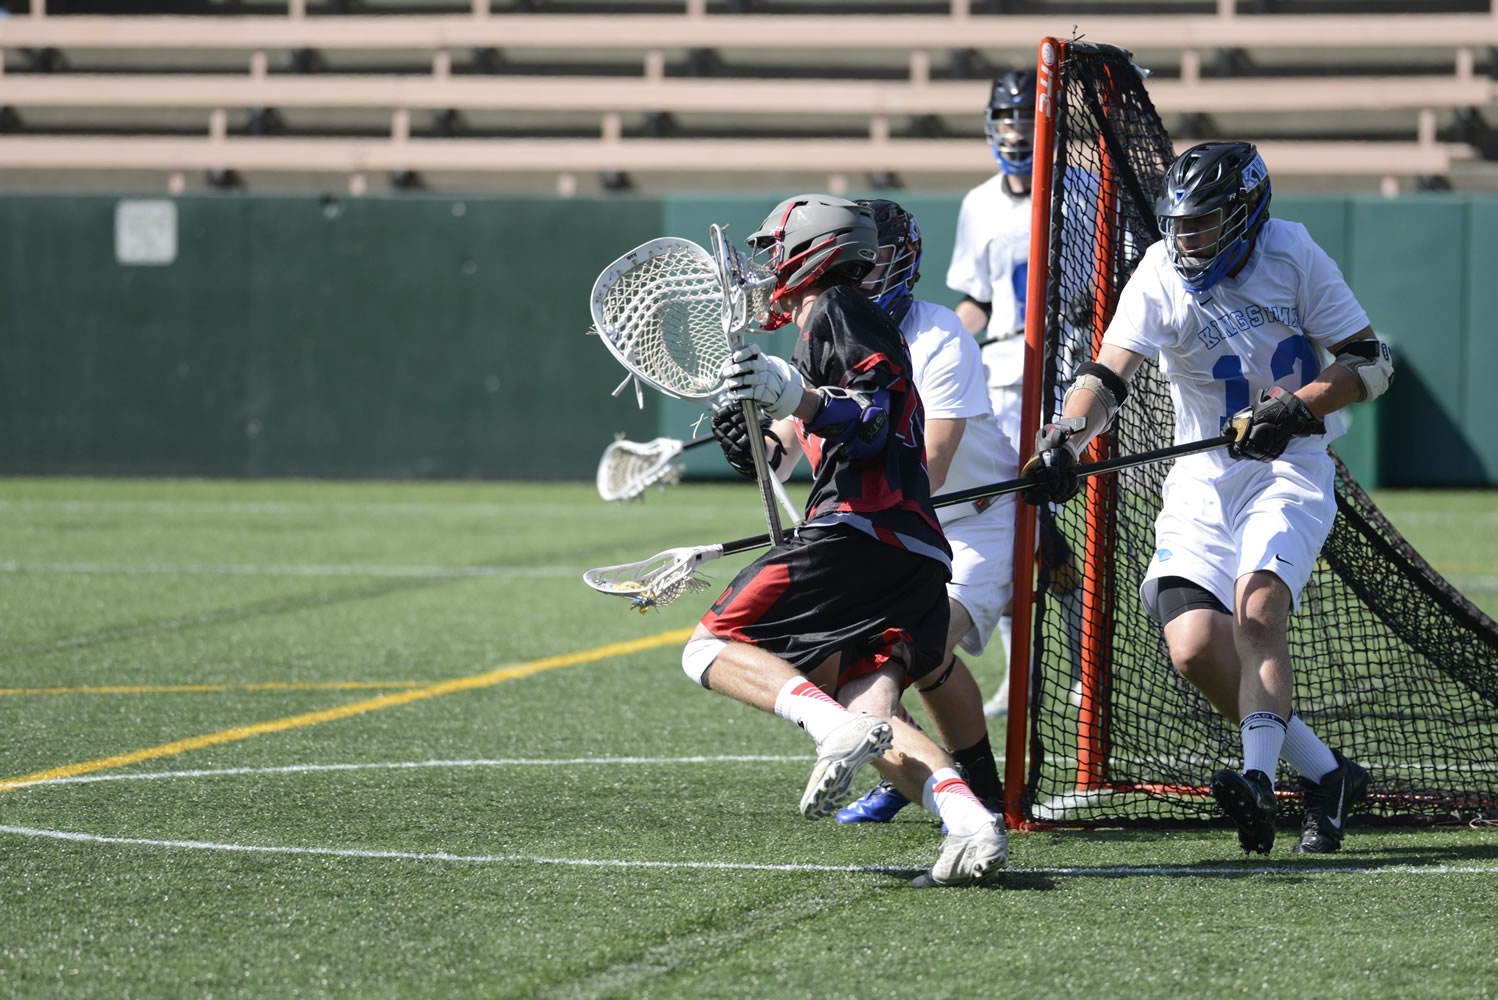 King's Way lacrosse defender Brandon Pearl, right, defends against Seattle Academy in Saturday's high school championship game at Seattle's Memorial Stadium.